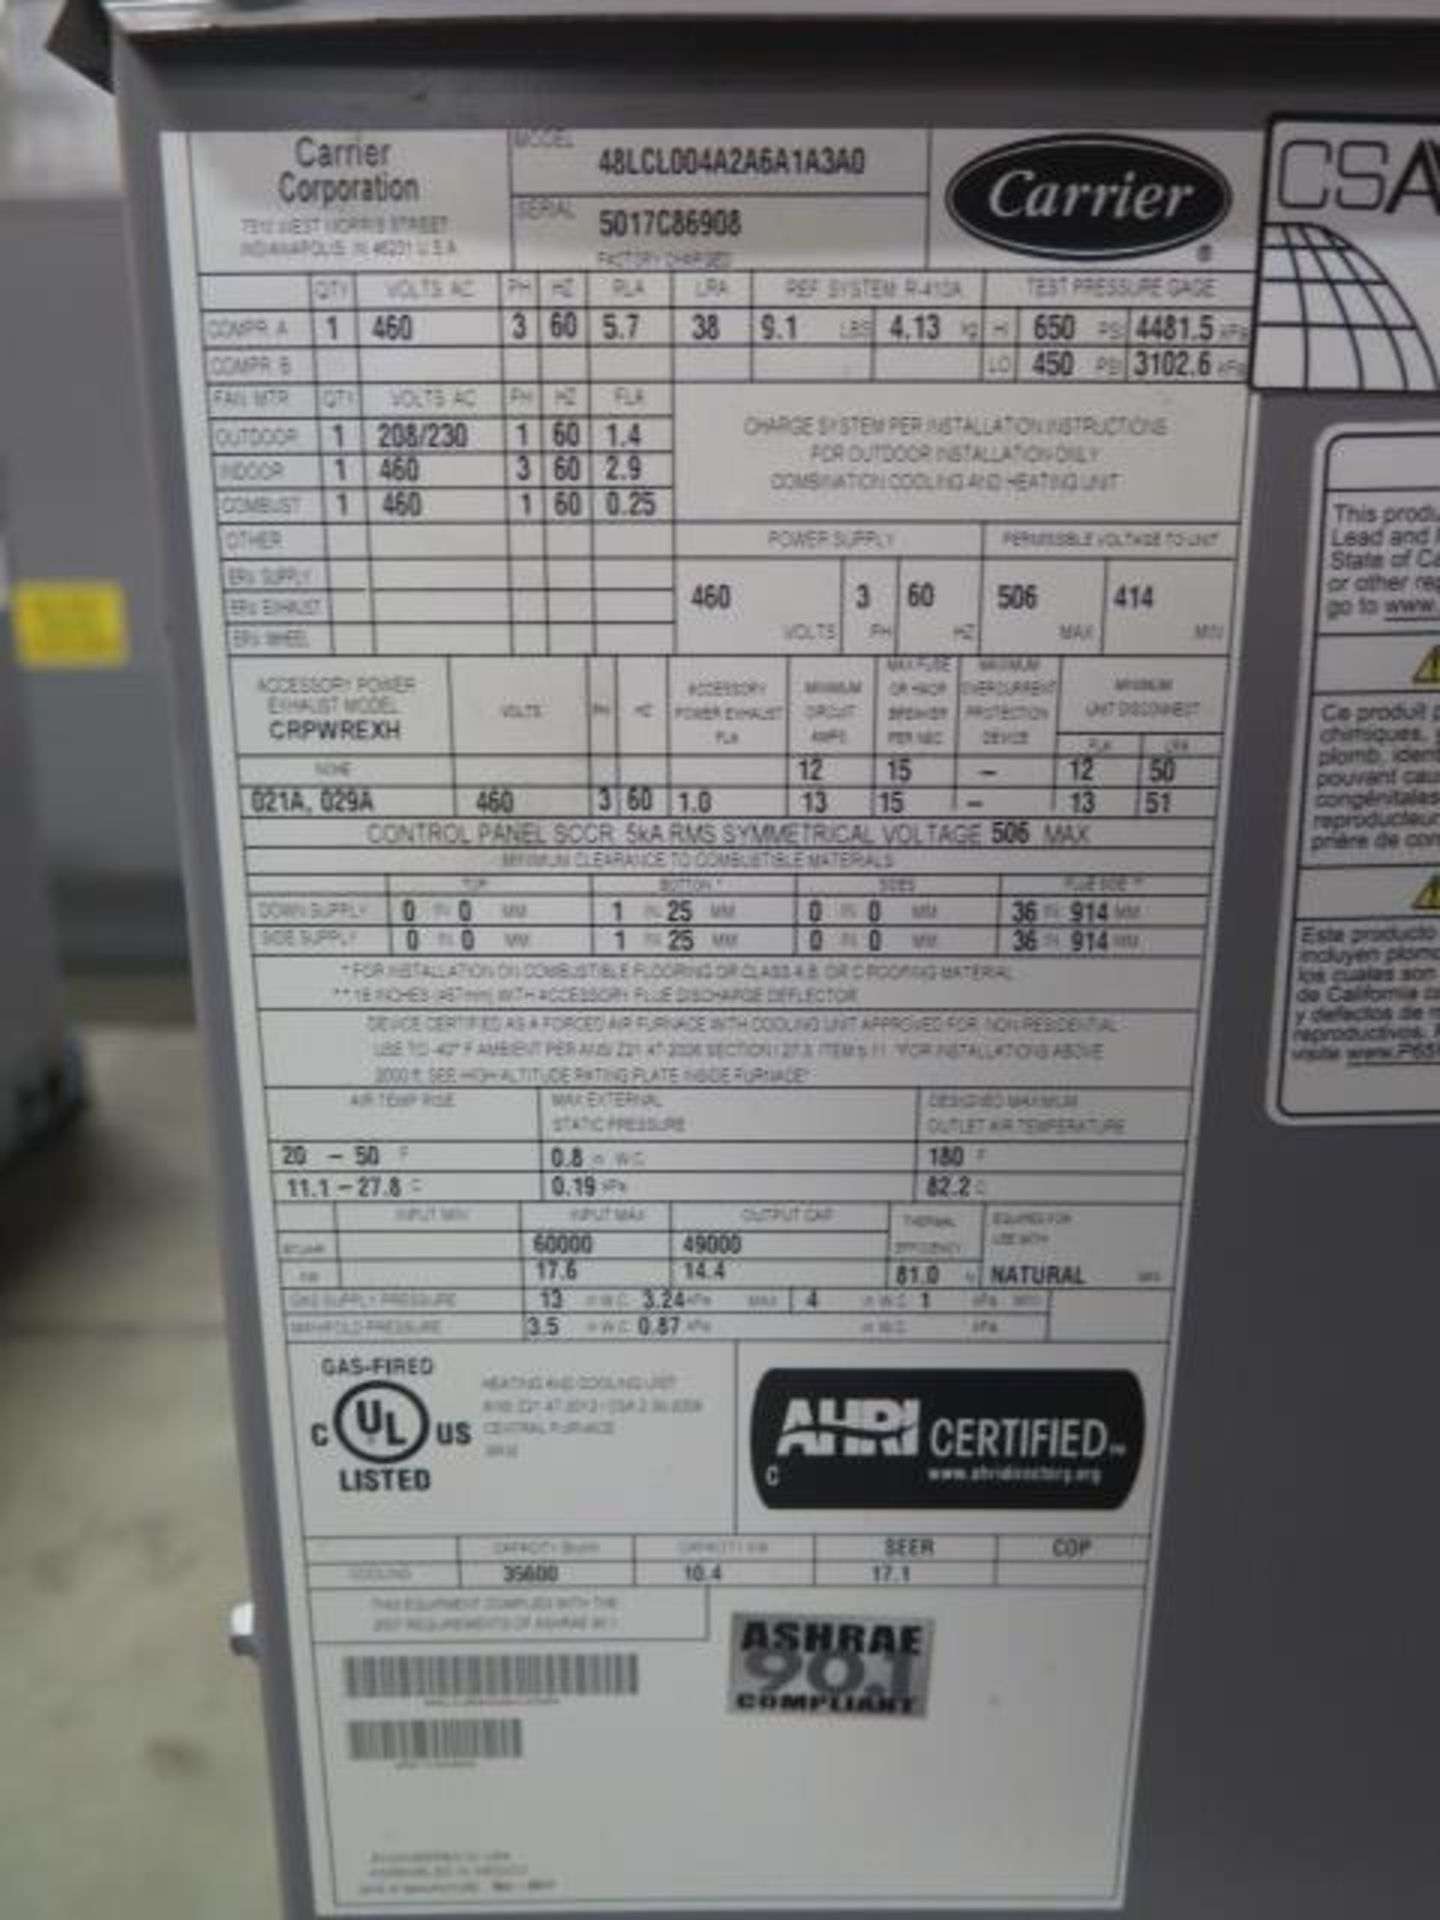 Carrier 48LCL04A2A6A1A3A0 3 Ton Gas Unit s/n 5017C86908 460V-3PH. (SOLD AS-IS - NO WARRANTY) - Image 7 of 7